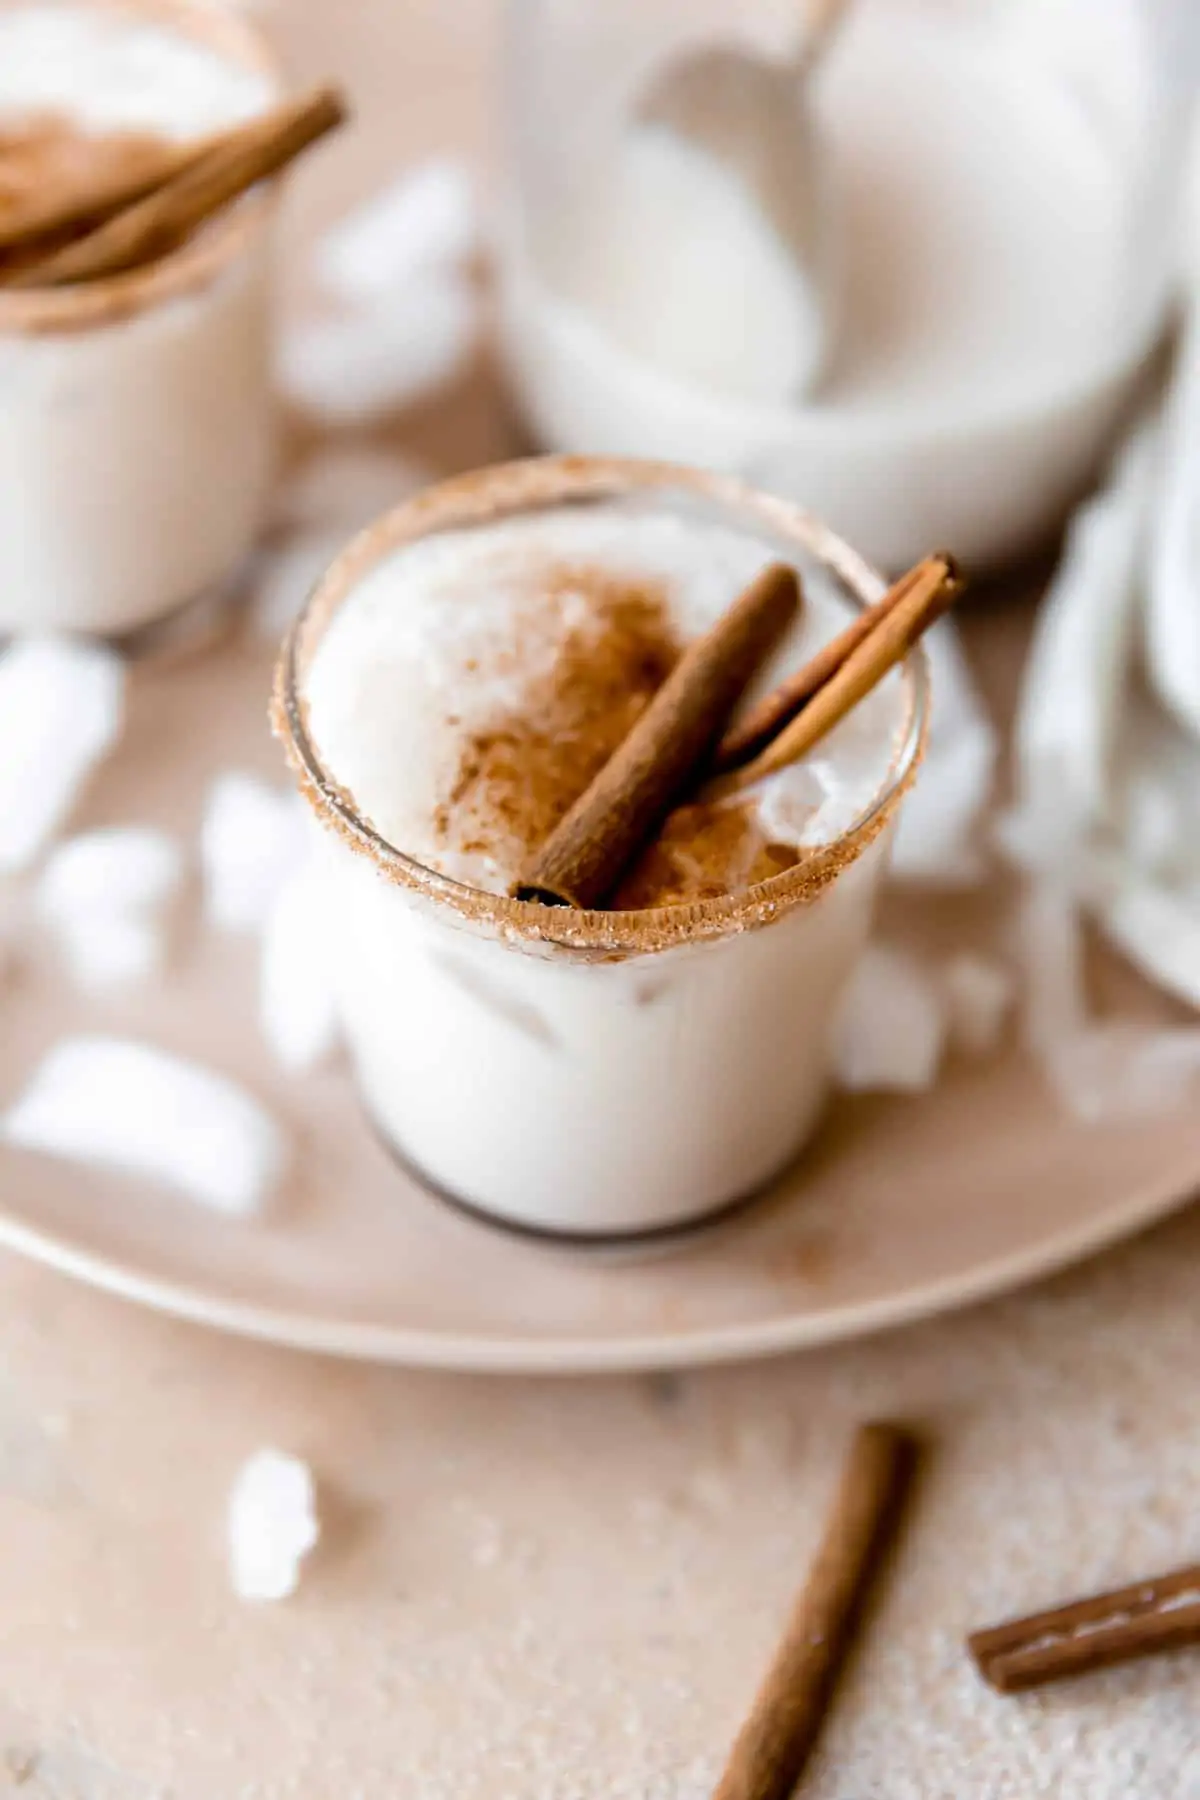 Glass rimmed with cinnamon and filled with cold and creamy homemade horchata, served with cinnamon sticks.